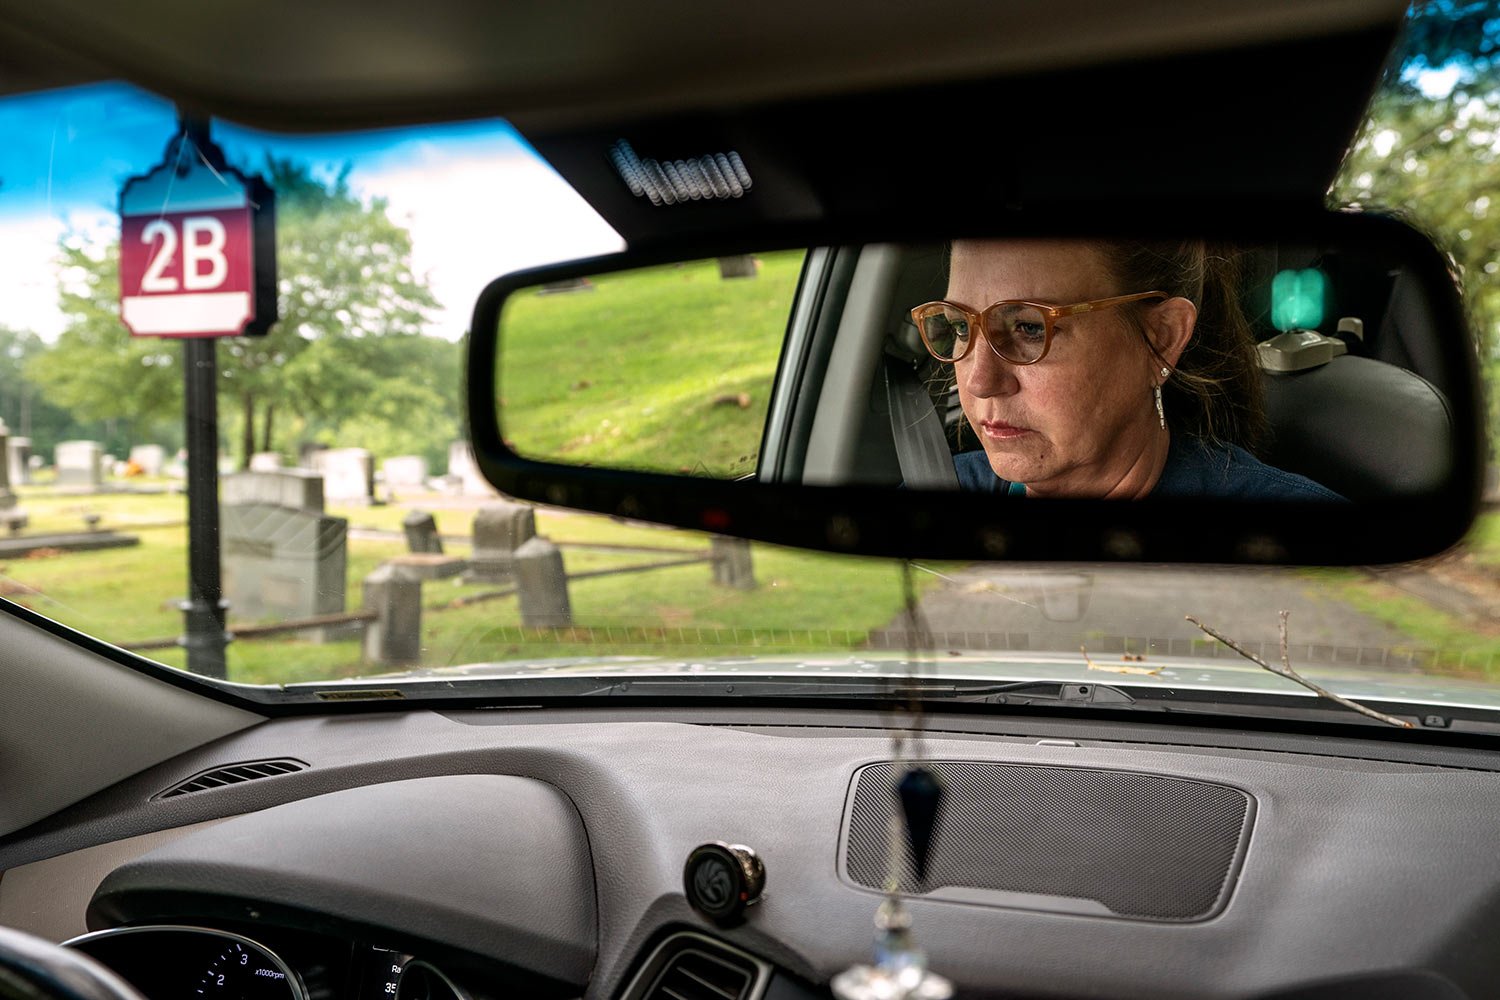  Janet Paulsen drives through the cemetery in Acworth, Ga., Tuesday, Aug. 8, 2023, where her estranged husband used to park with their twin sons in their car seats and drink before bringing them home. (AP Photo/David Goldman)  